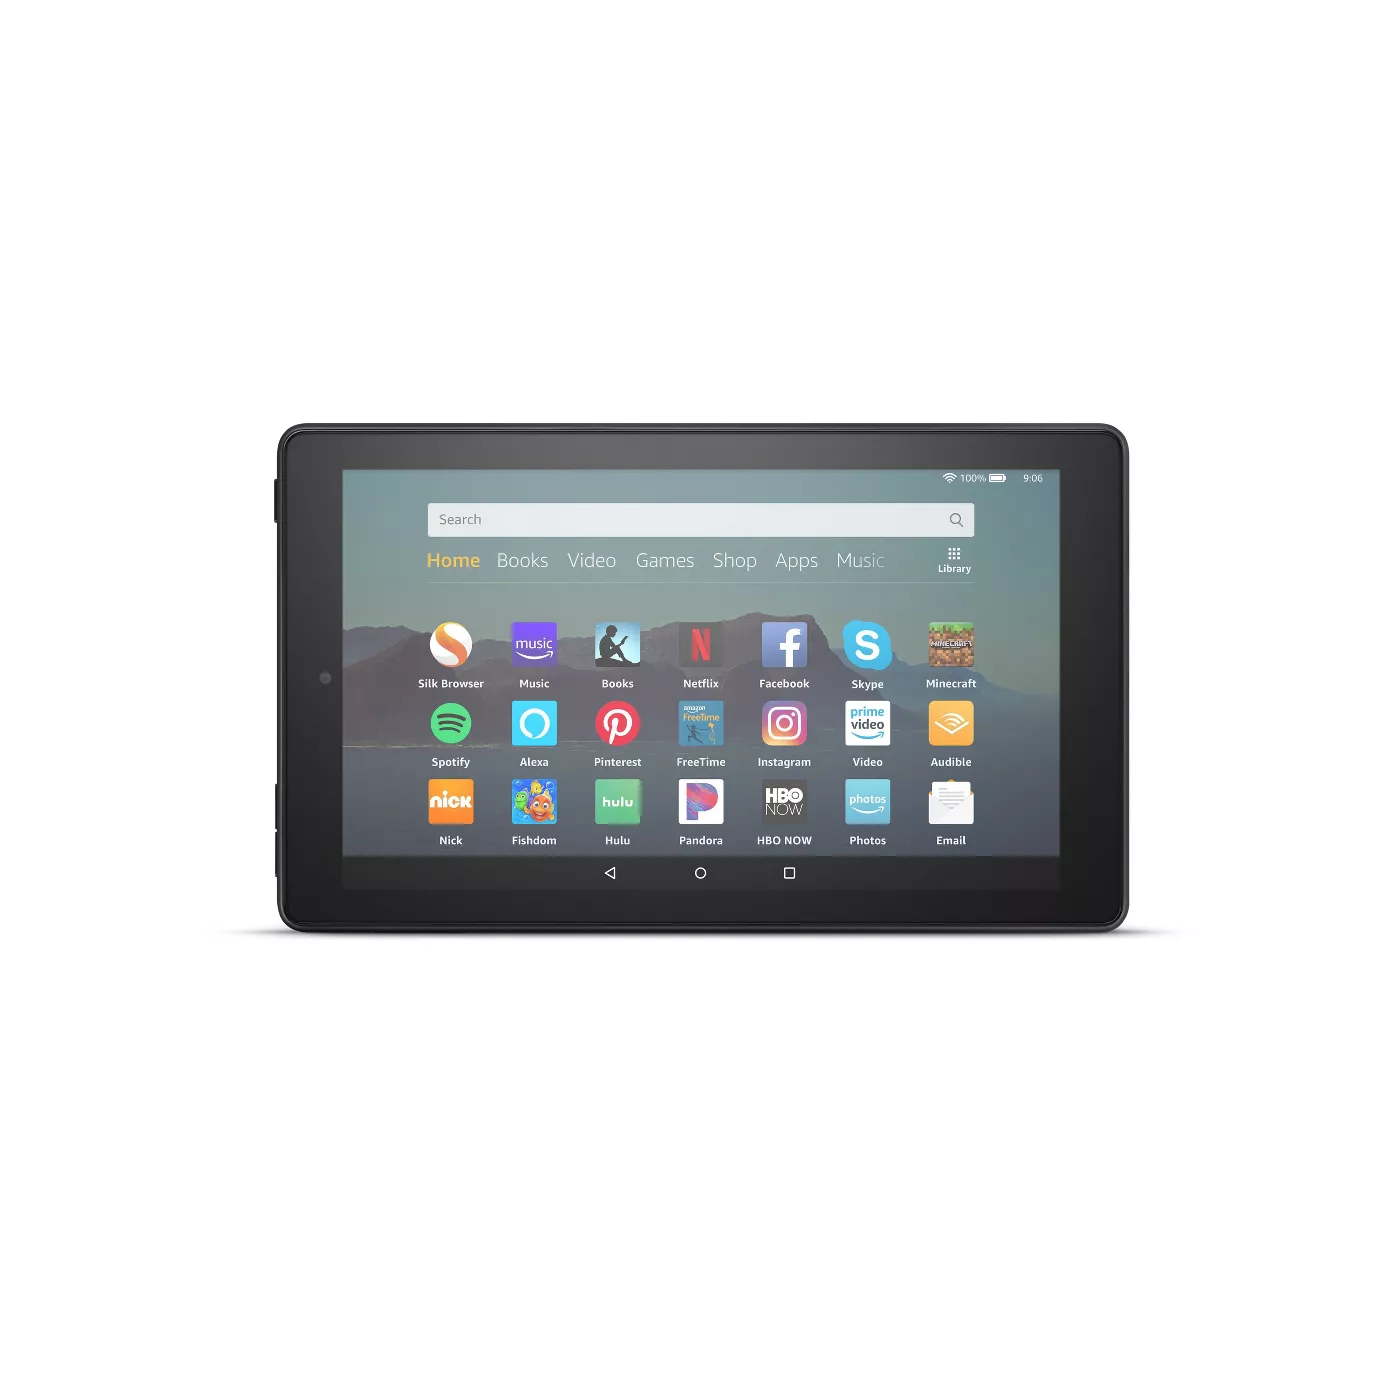 Amazon Fire 7" Tablet (9th Generation, 2019 release) - 16GB - Black - image 1 of 5